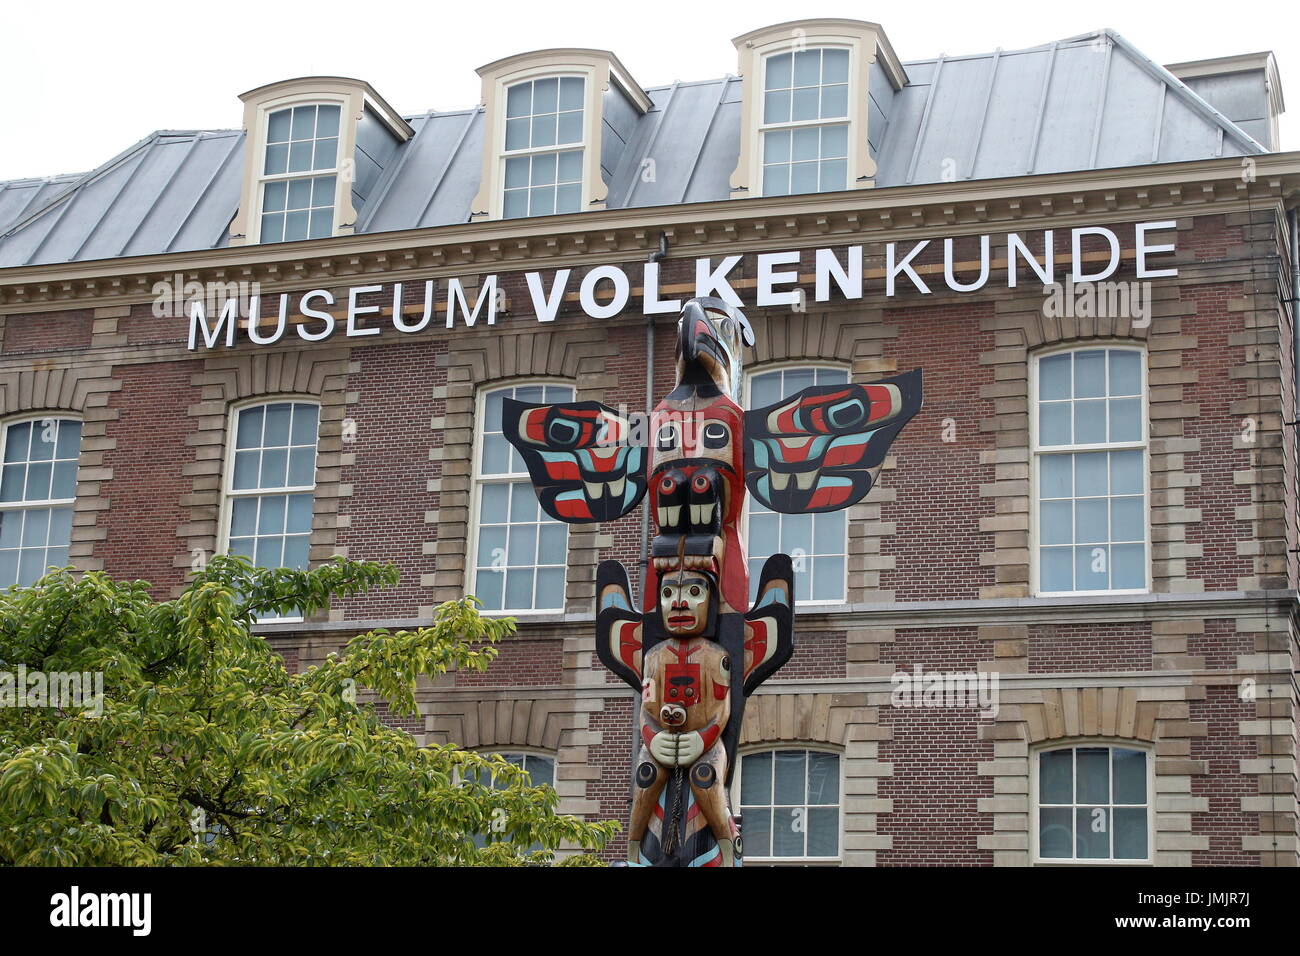 Totem pole in front of Rijksmuseum Volkenkunde (National Museum of Ethnology) in the city of Leiden, Netherlands. Founded in 1837, oldest in Europe. Stock Photo